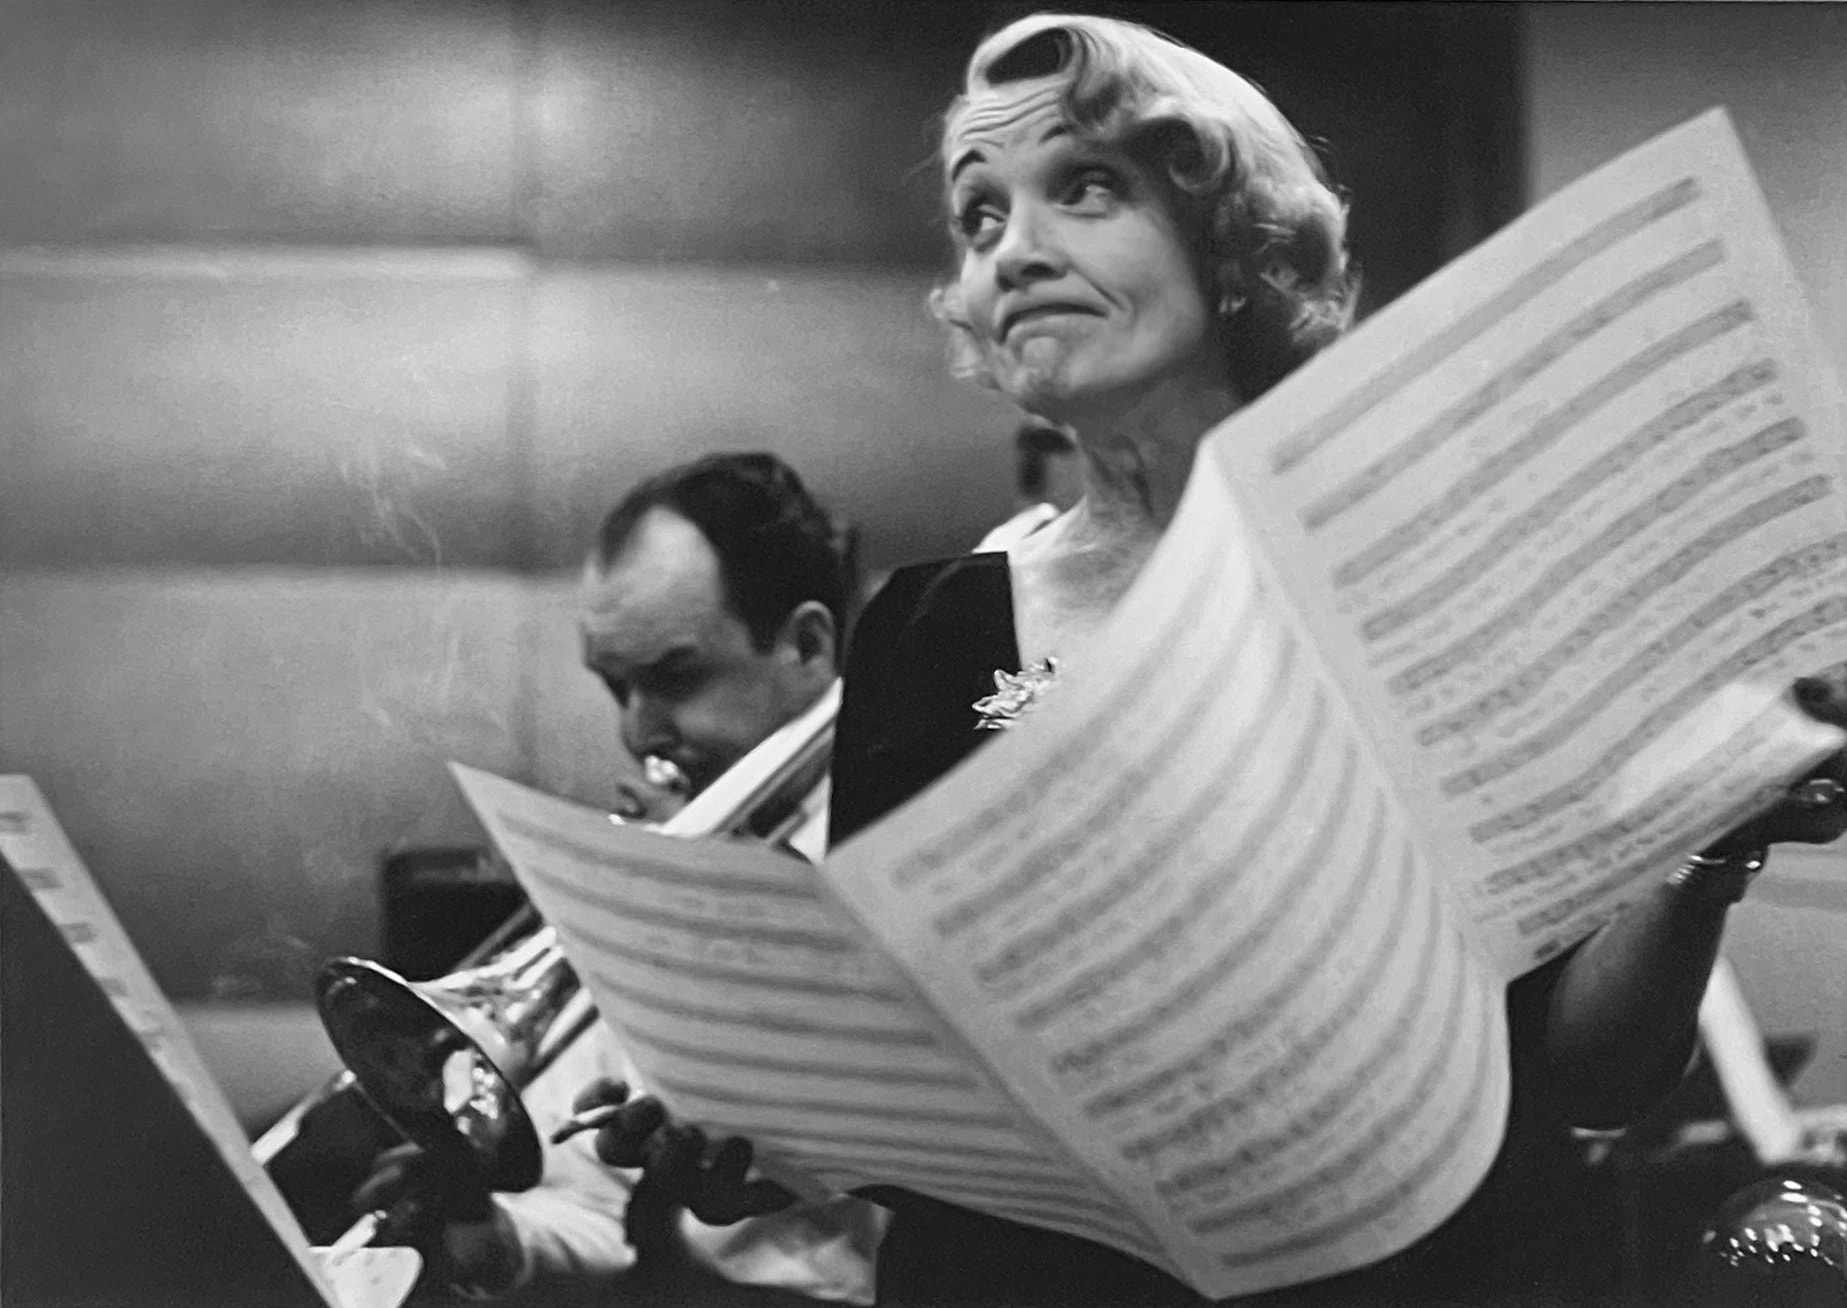 Eve Arnold, 'Marlene Dietrich, Recording Session With Musical Score, New York City, 1952'